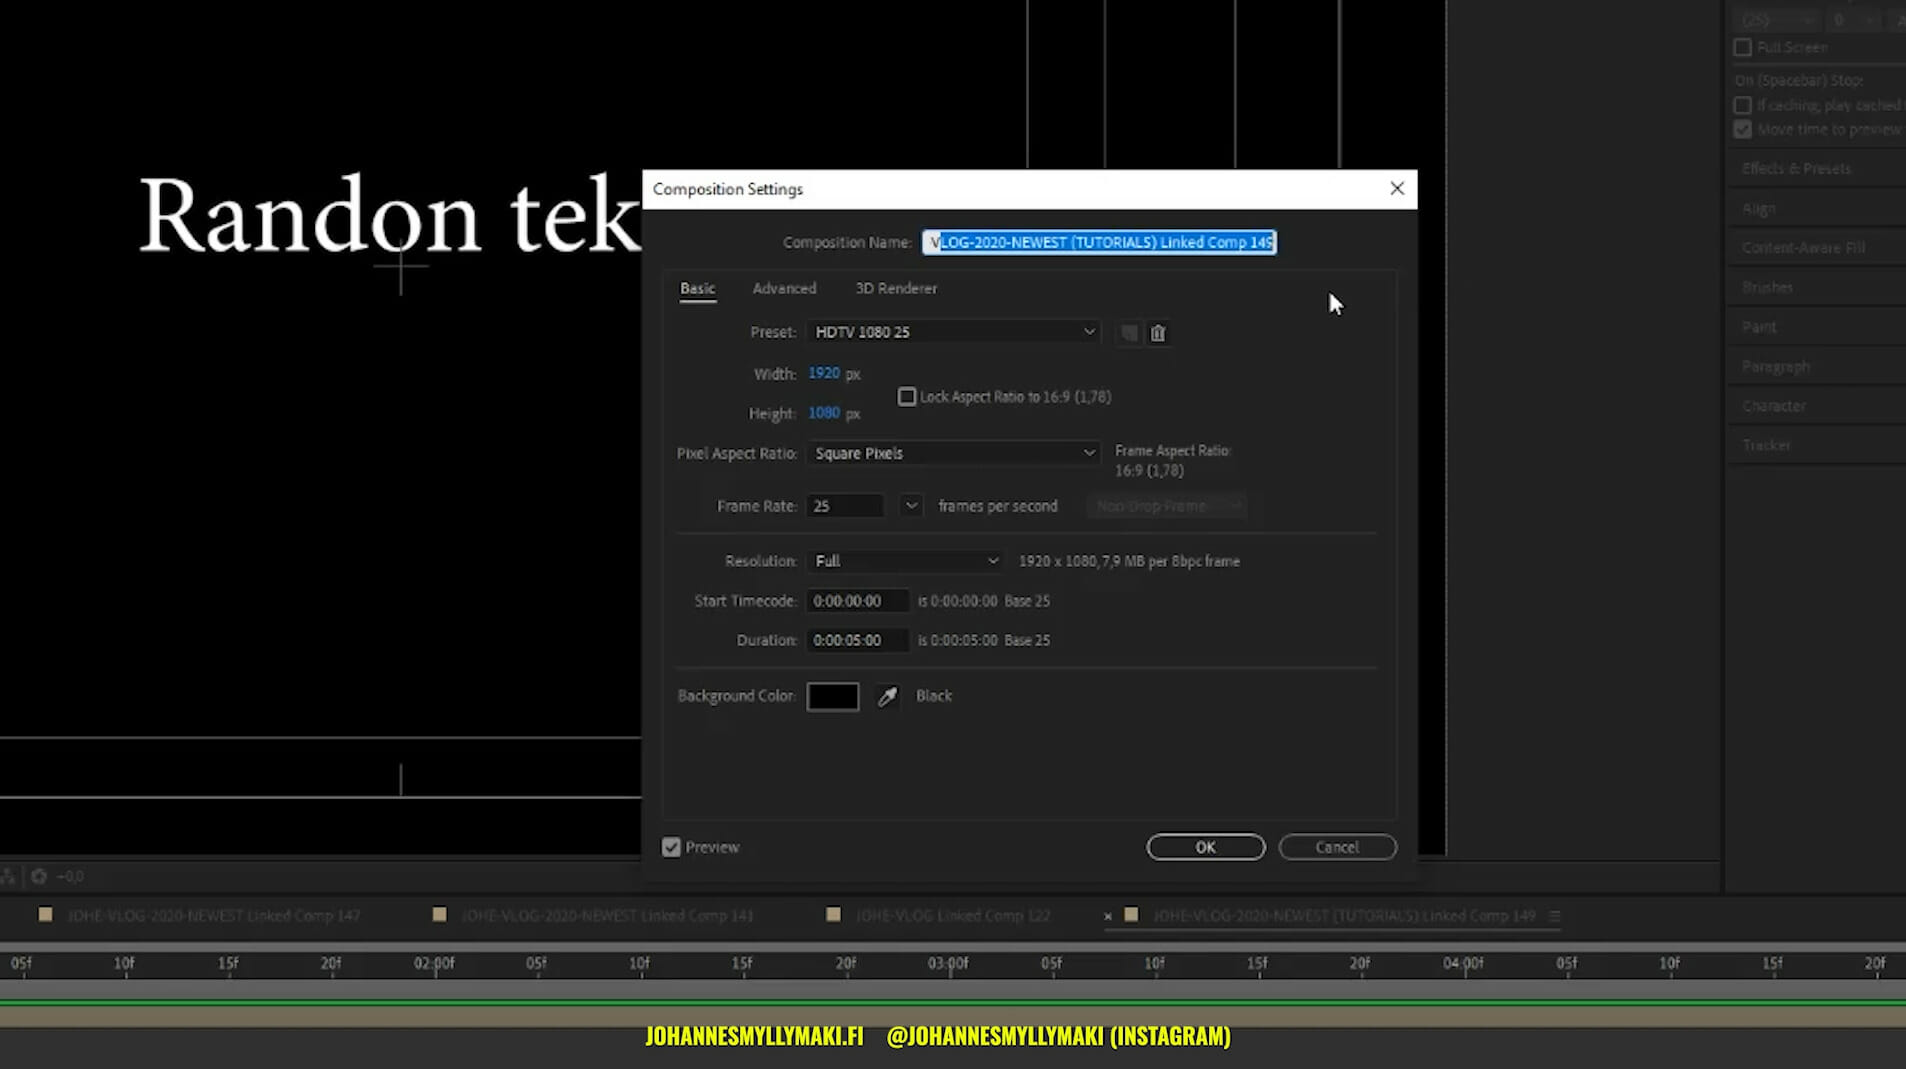 linkitetty kompositio, linked composition after effects